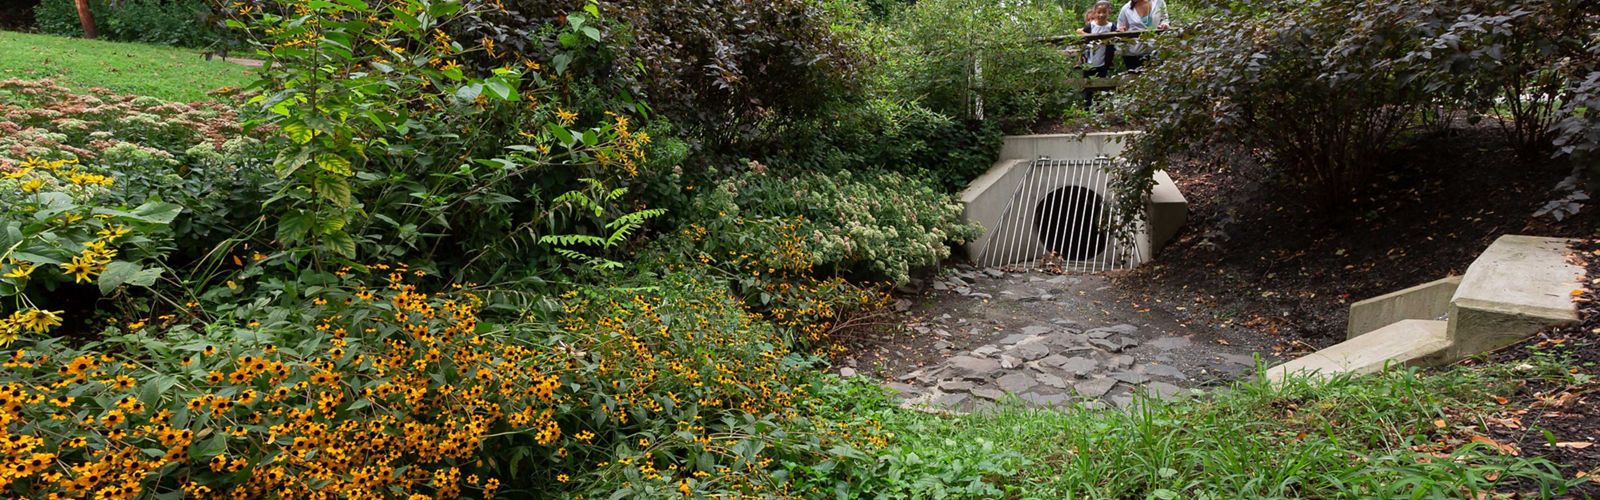 A stormwater drain sits in a small green space pouring water out into a small rock bed.